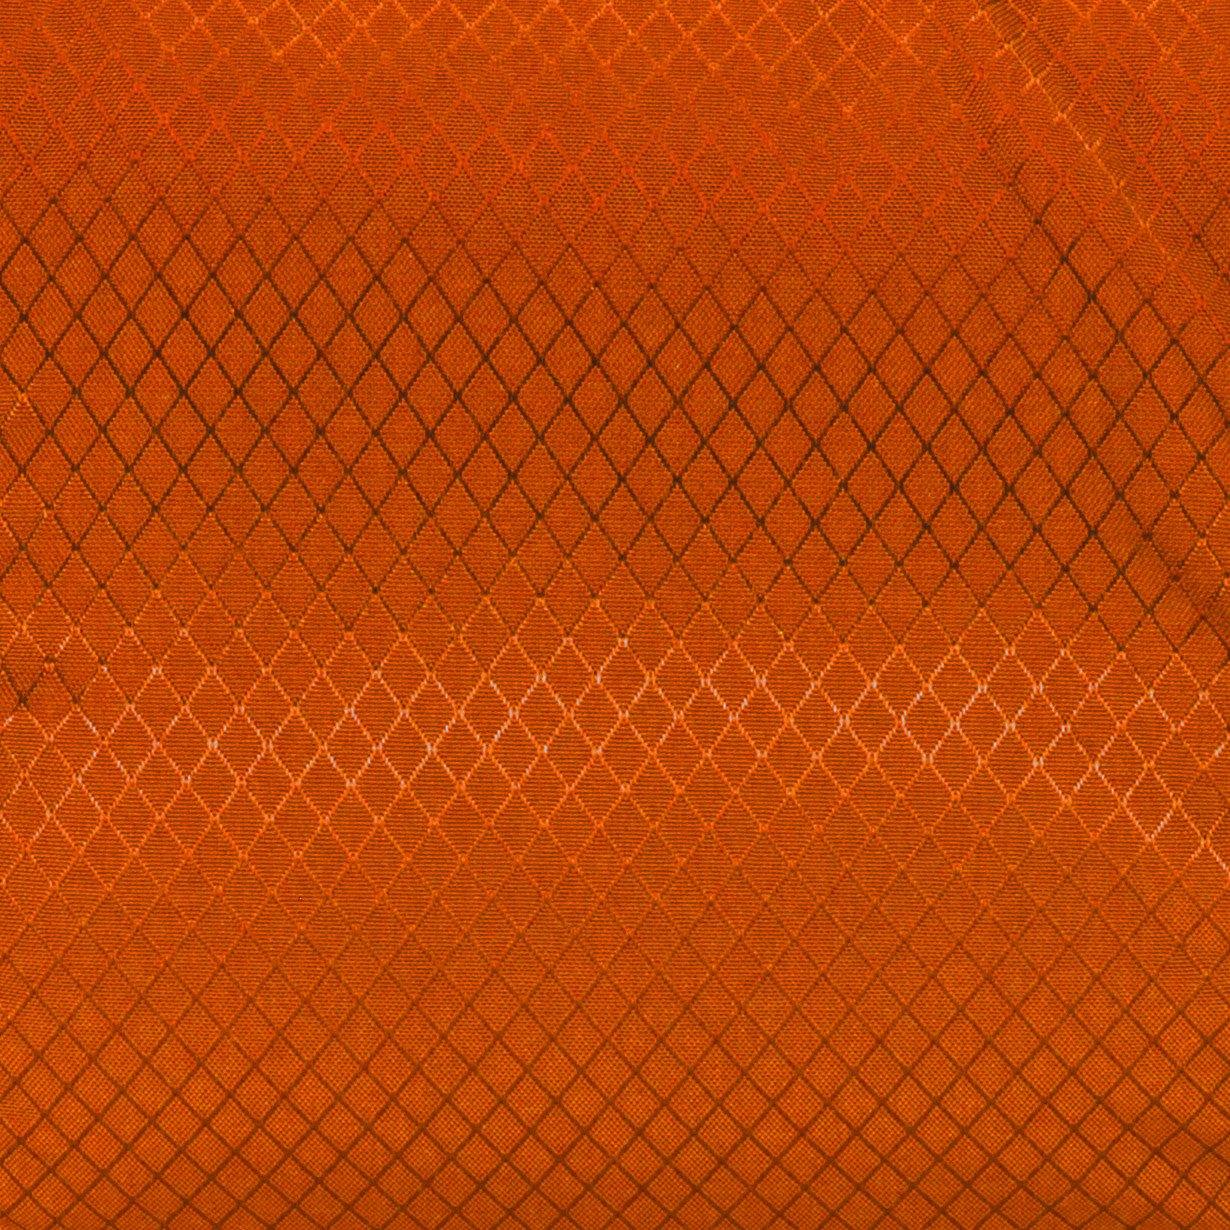 Studio photo the International Orange SD1224DLX Standard Duffle by Northstar Bags. 44 liter duffel with diamond ripstop fabric, thick webbing straps, and a large format metal zipper. Guaranteed for life.